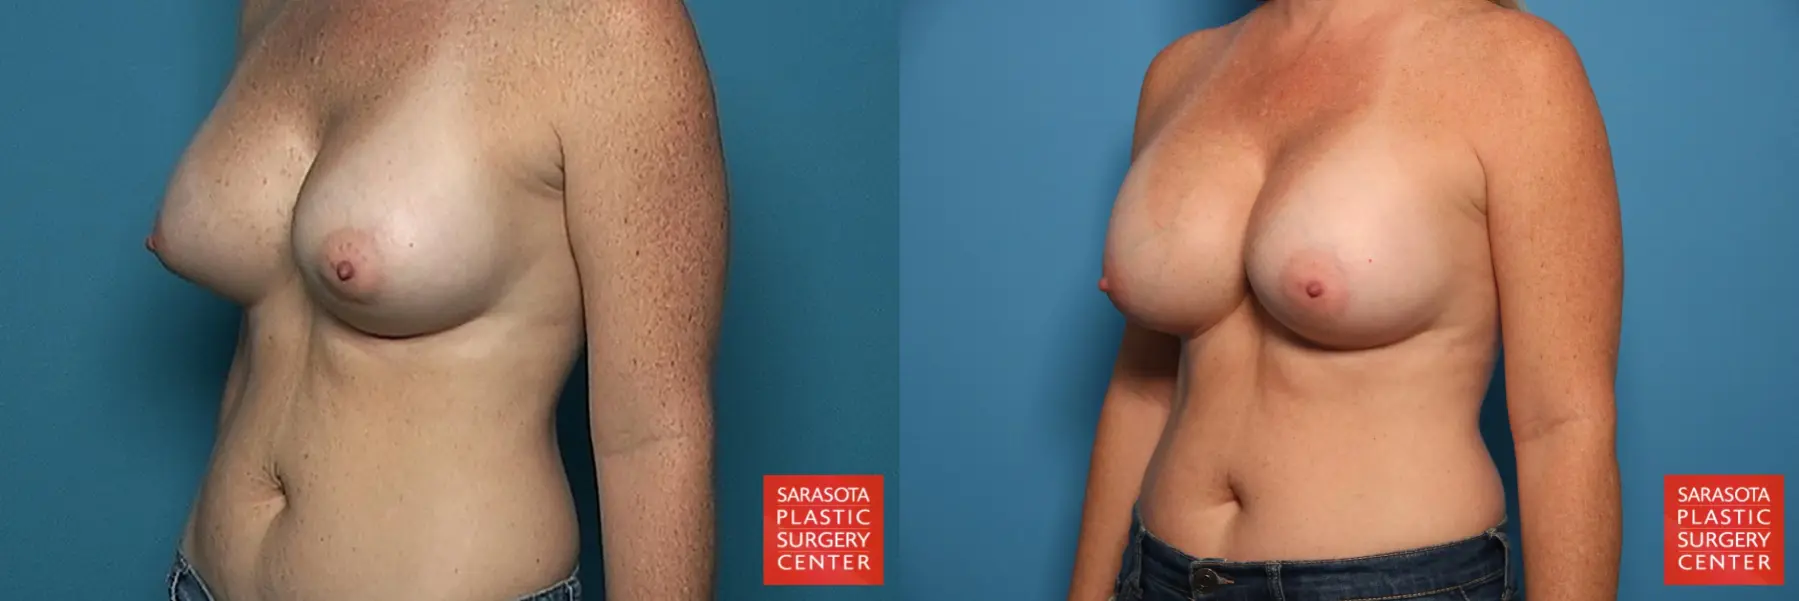 Breast Implant Exchange: Patient 3 - Before and After 2